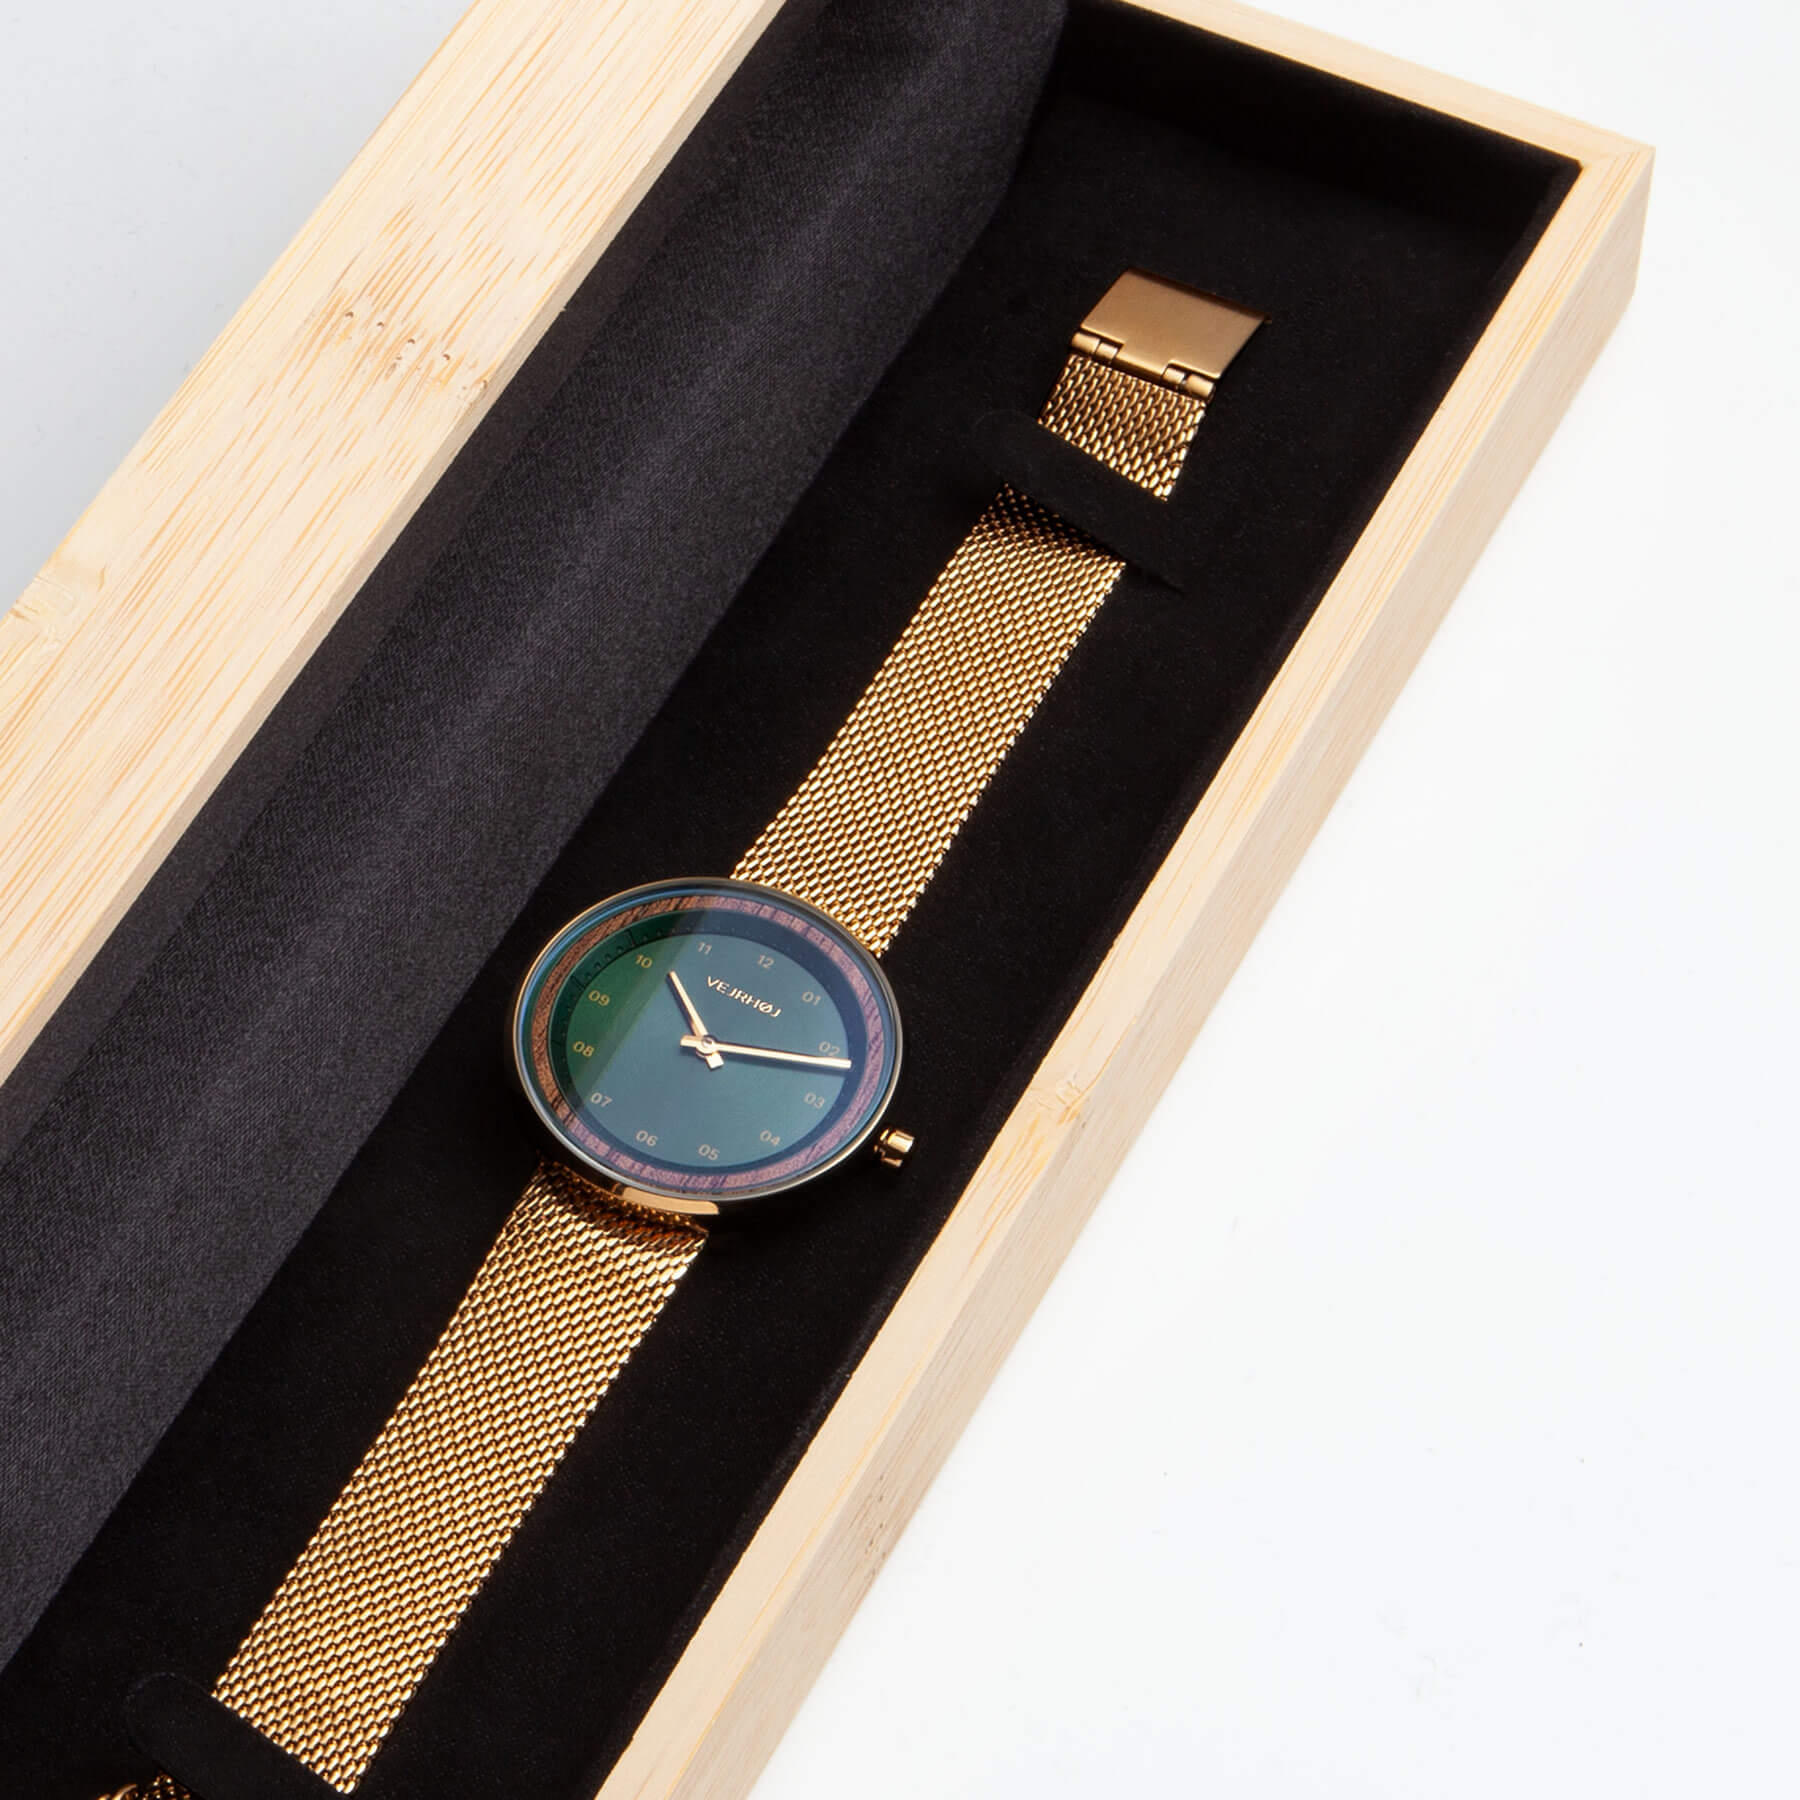 Green watch with golden casing with golden mesh band inside bamboo box